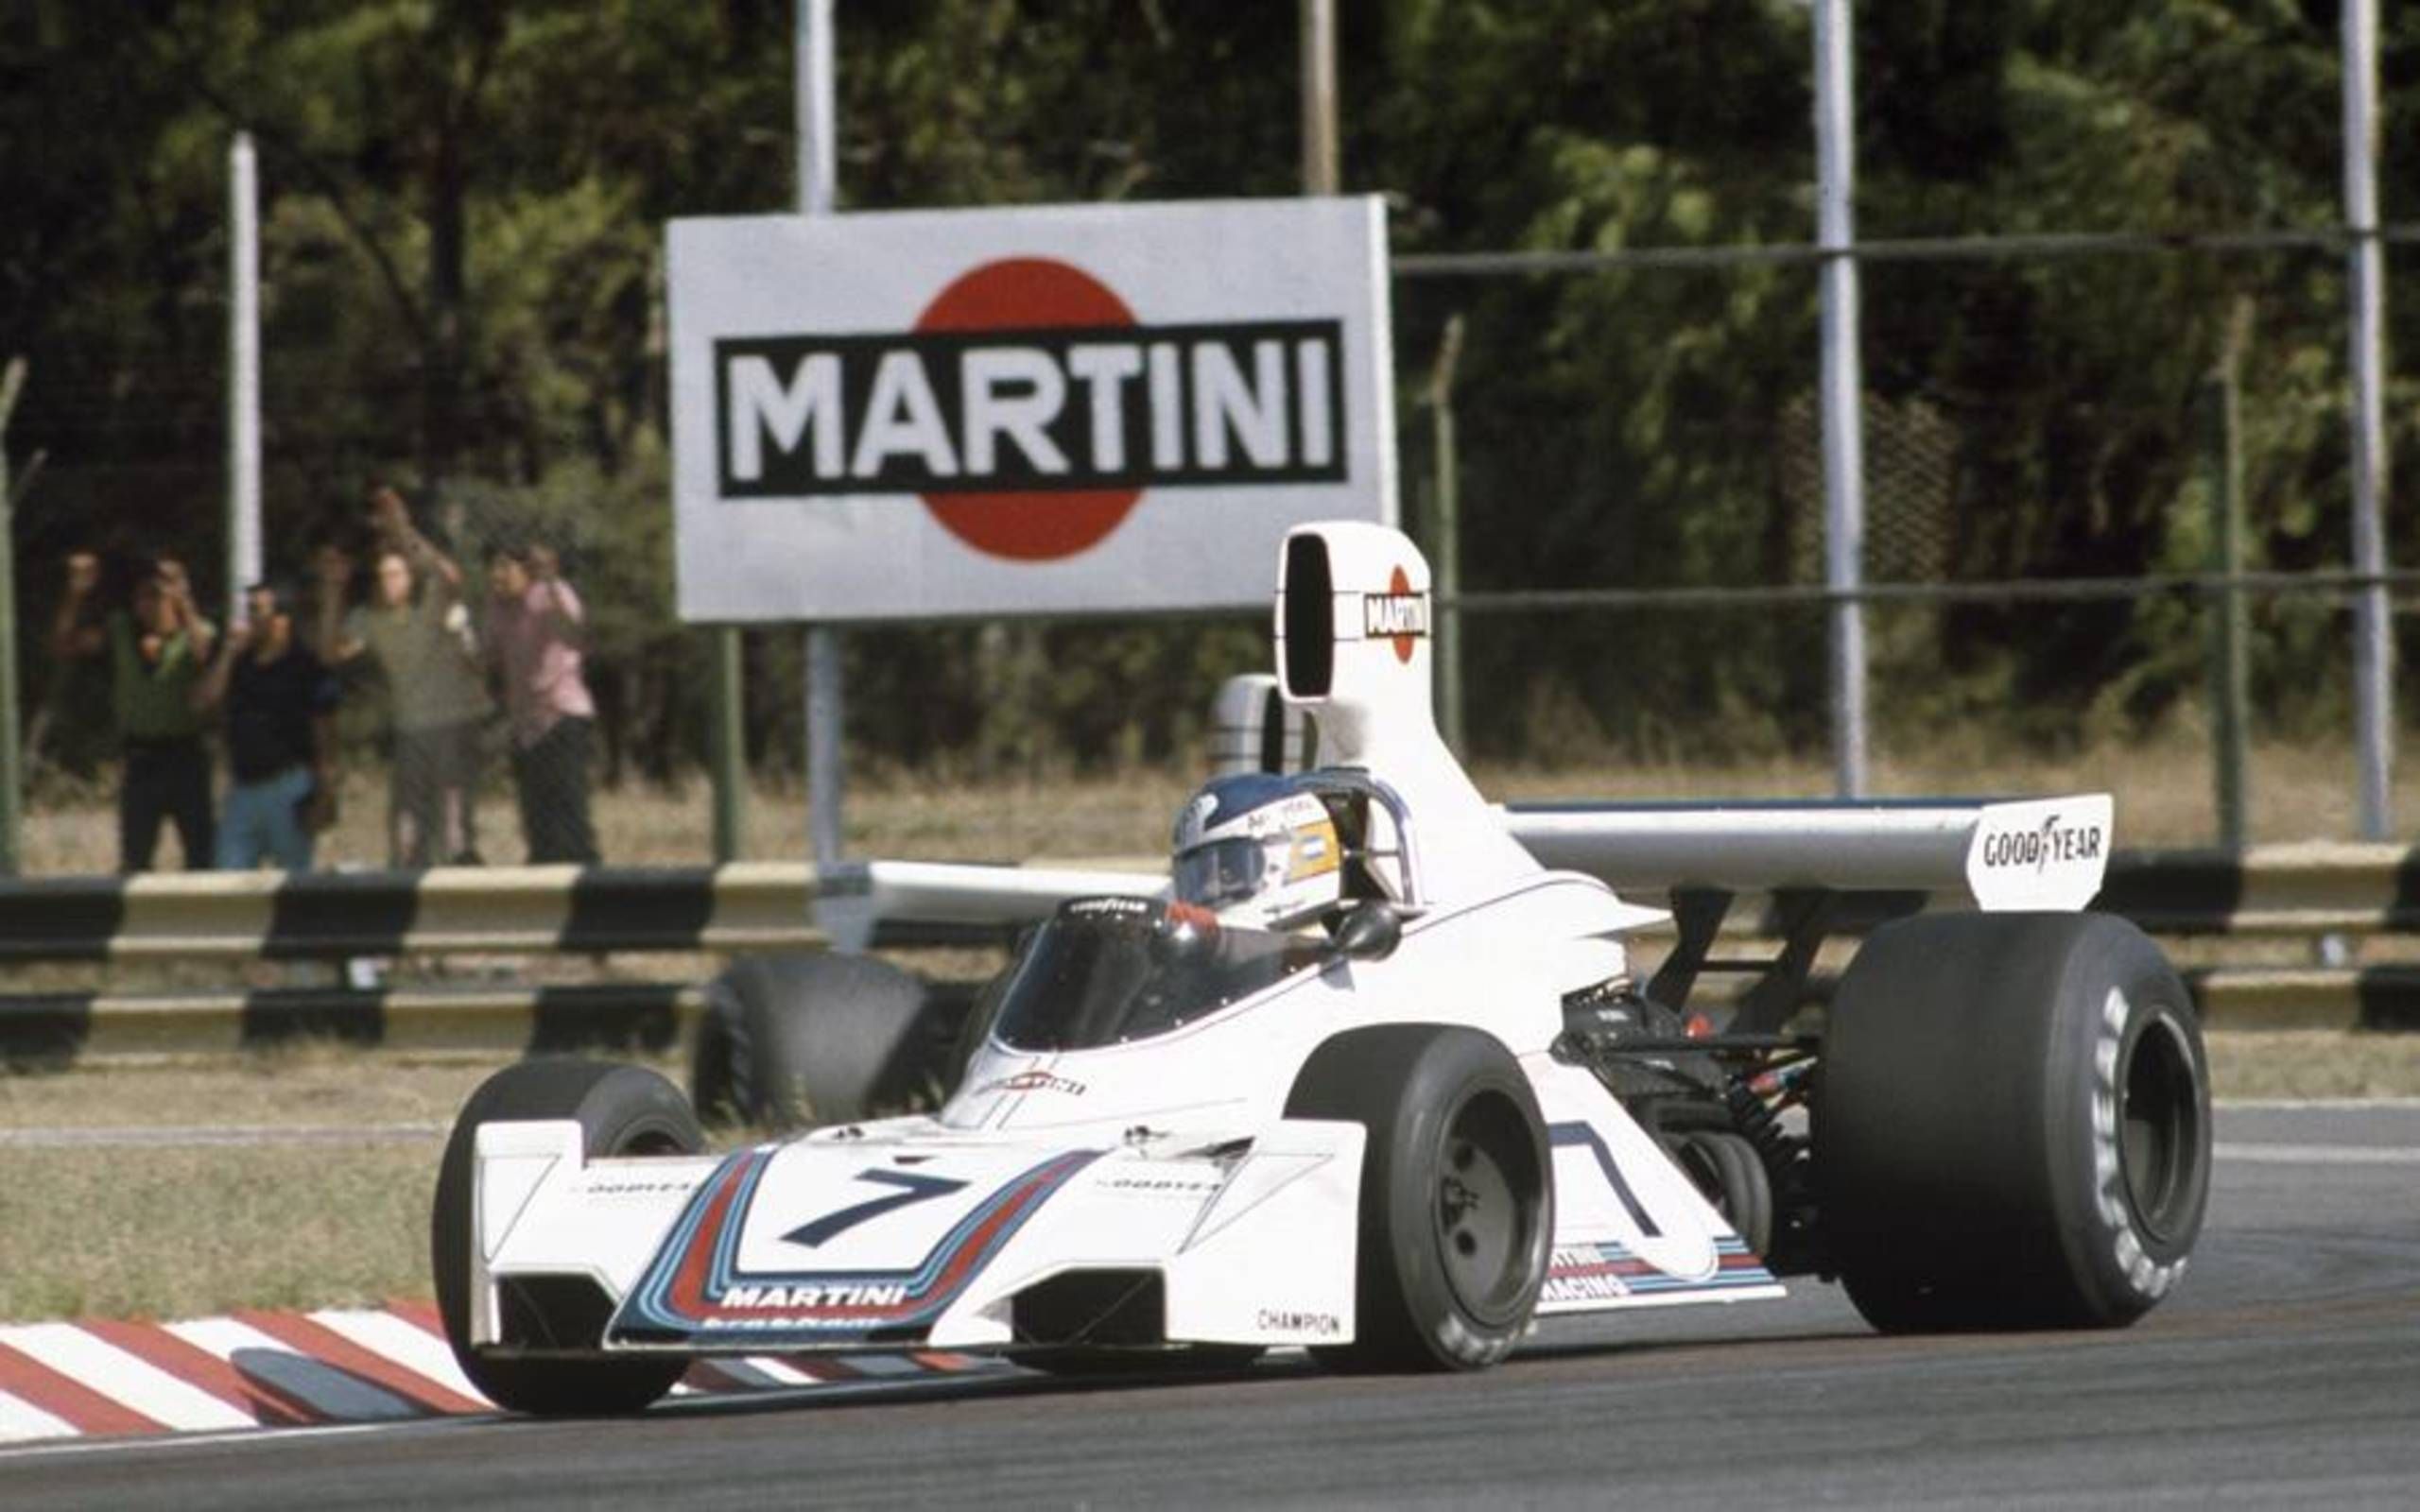 Martini livery reportedly returning to Formula One